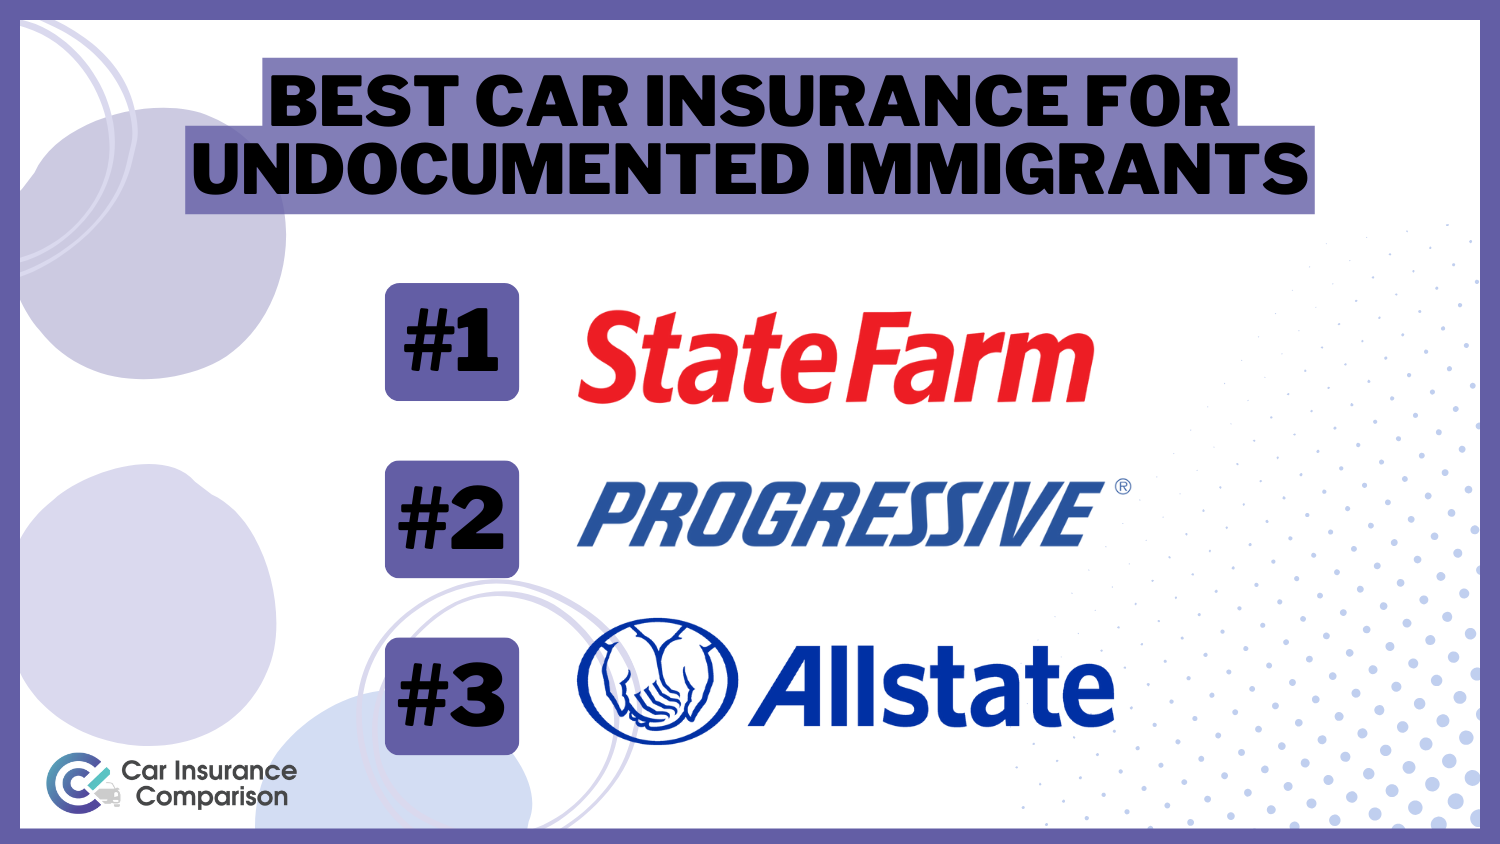 Best Car Insurance for Undocumented Immigrants: State Farm, Progressive, and Allstate